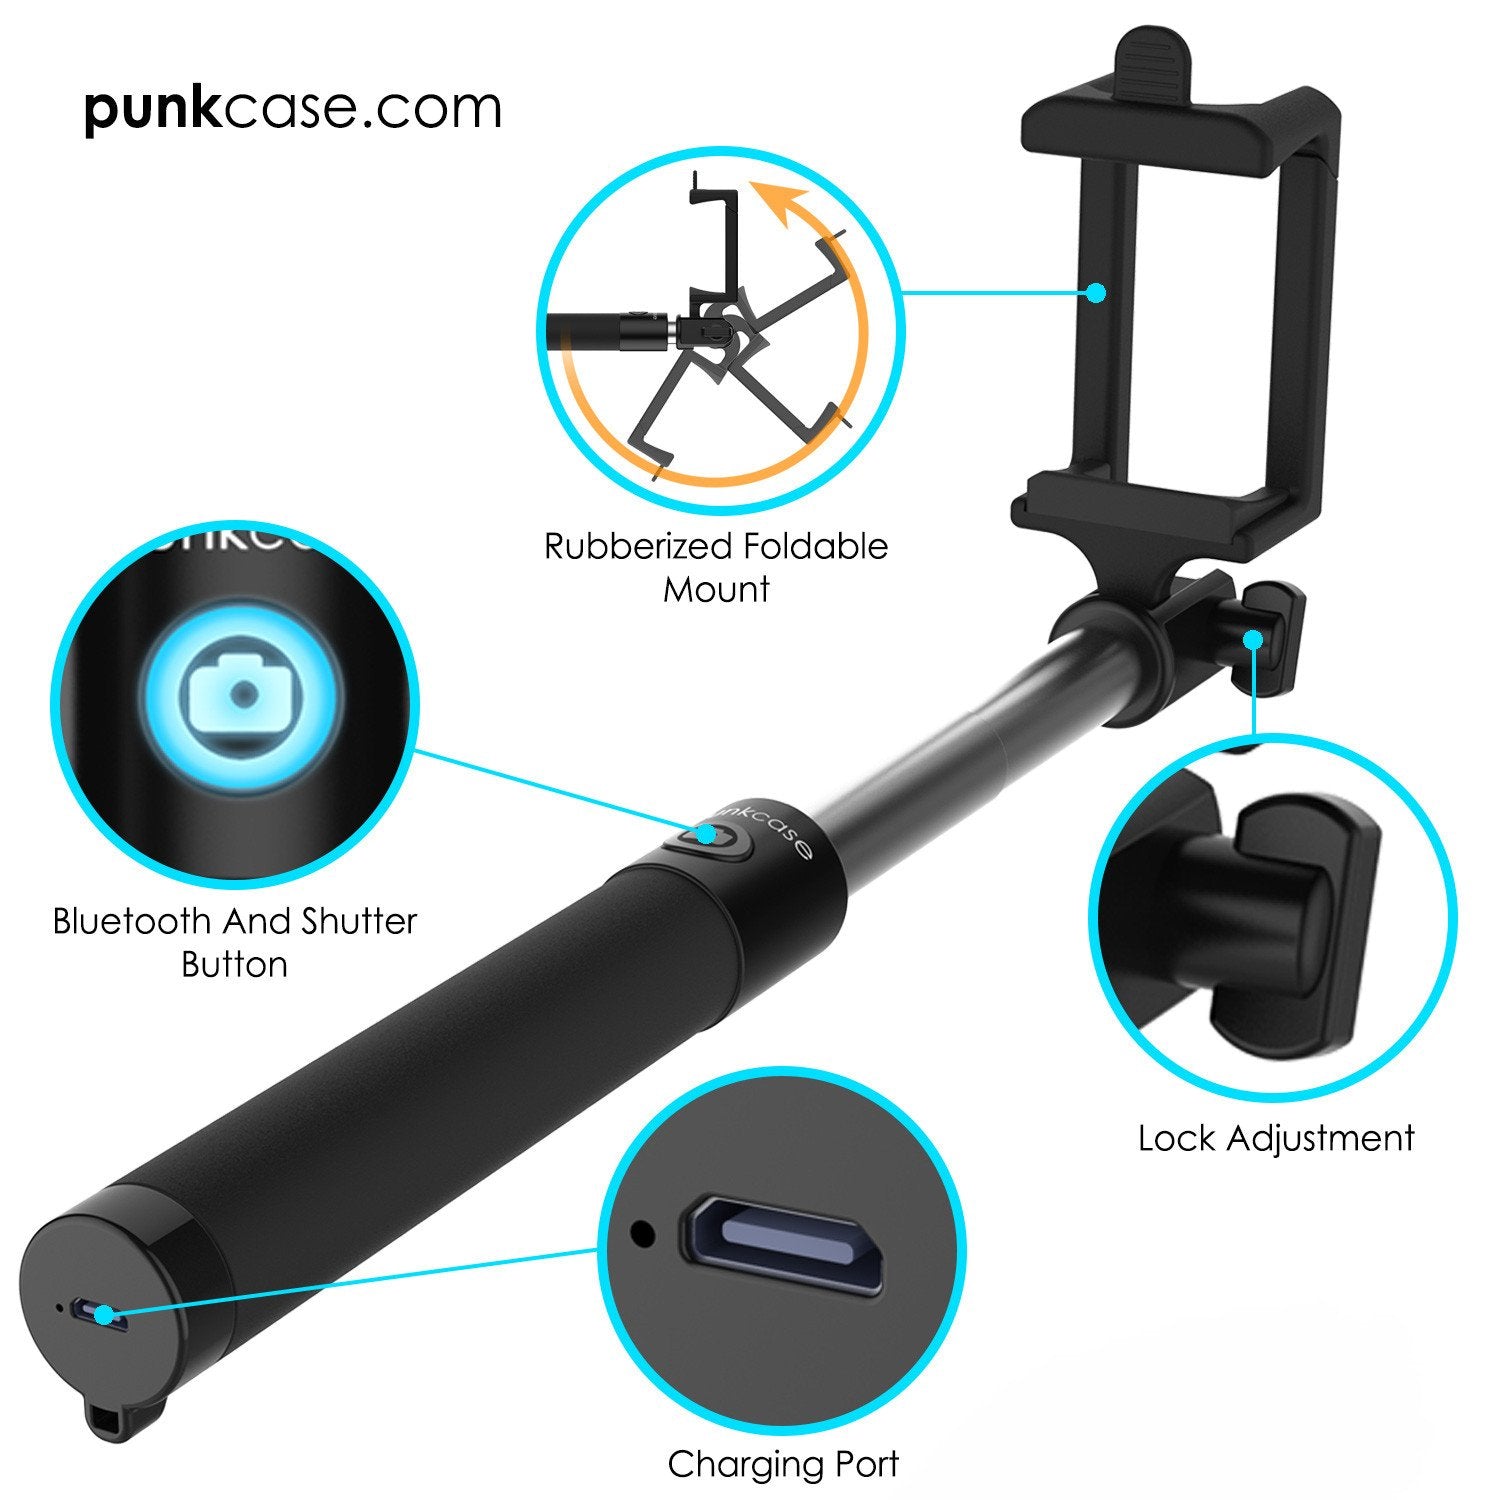 Selfie Stick - Black, Extendable Monopod with Built-In Bluetooth Remote Shutter